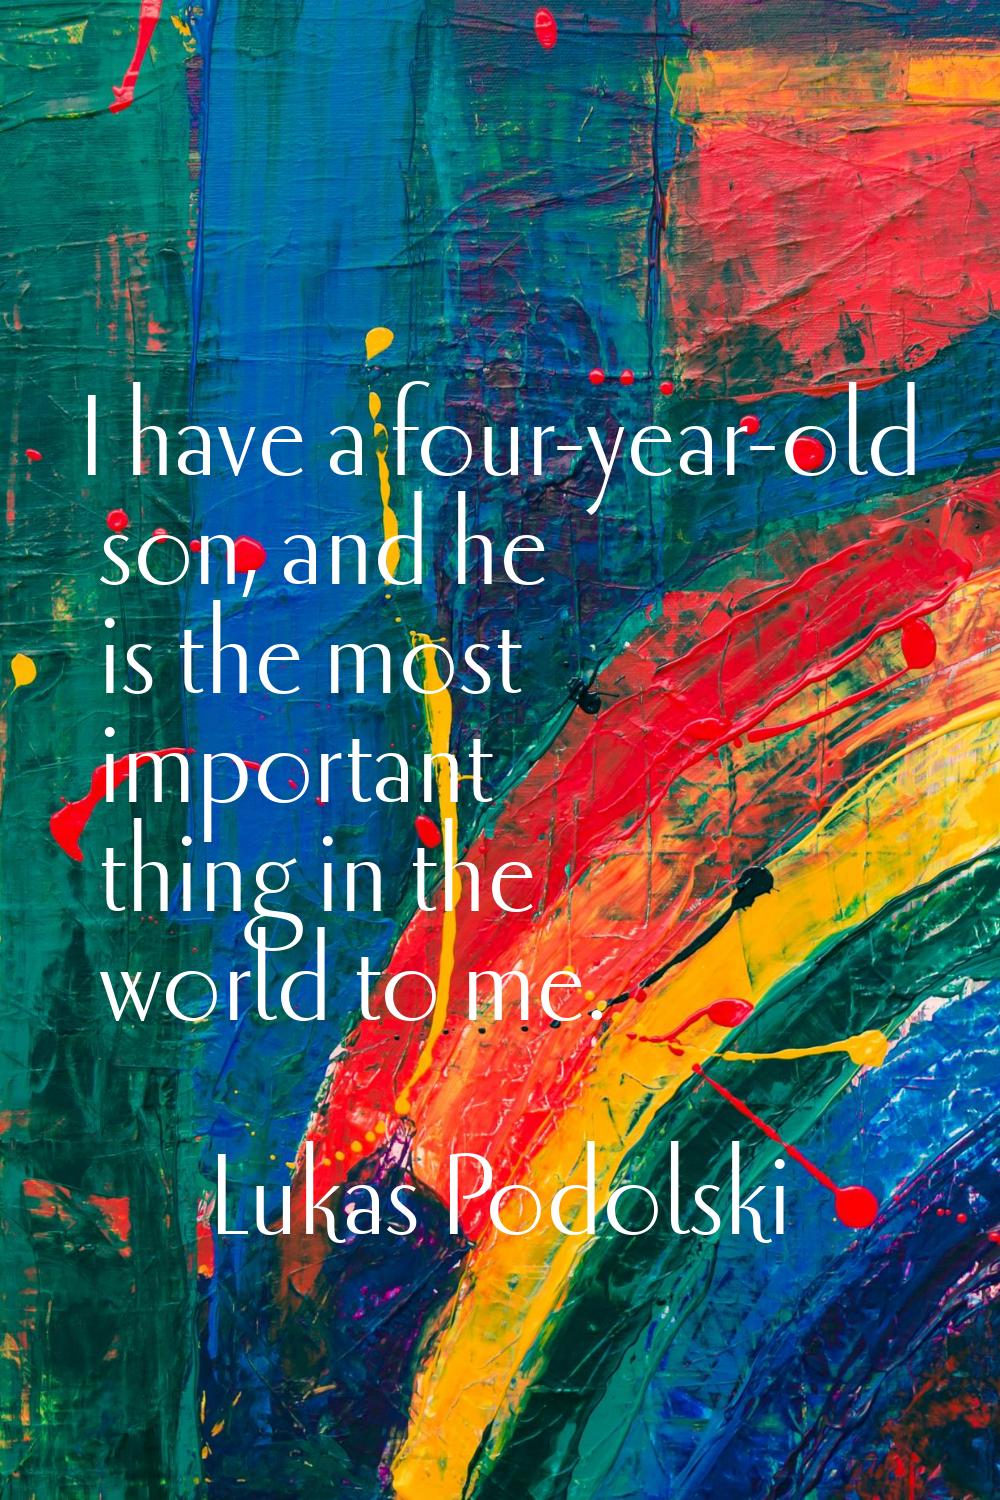 I have a four-year-old son, and he is the most important thing in the world to me.